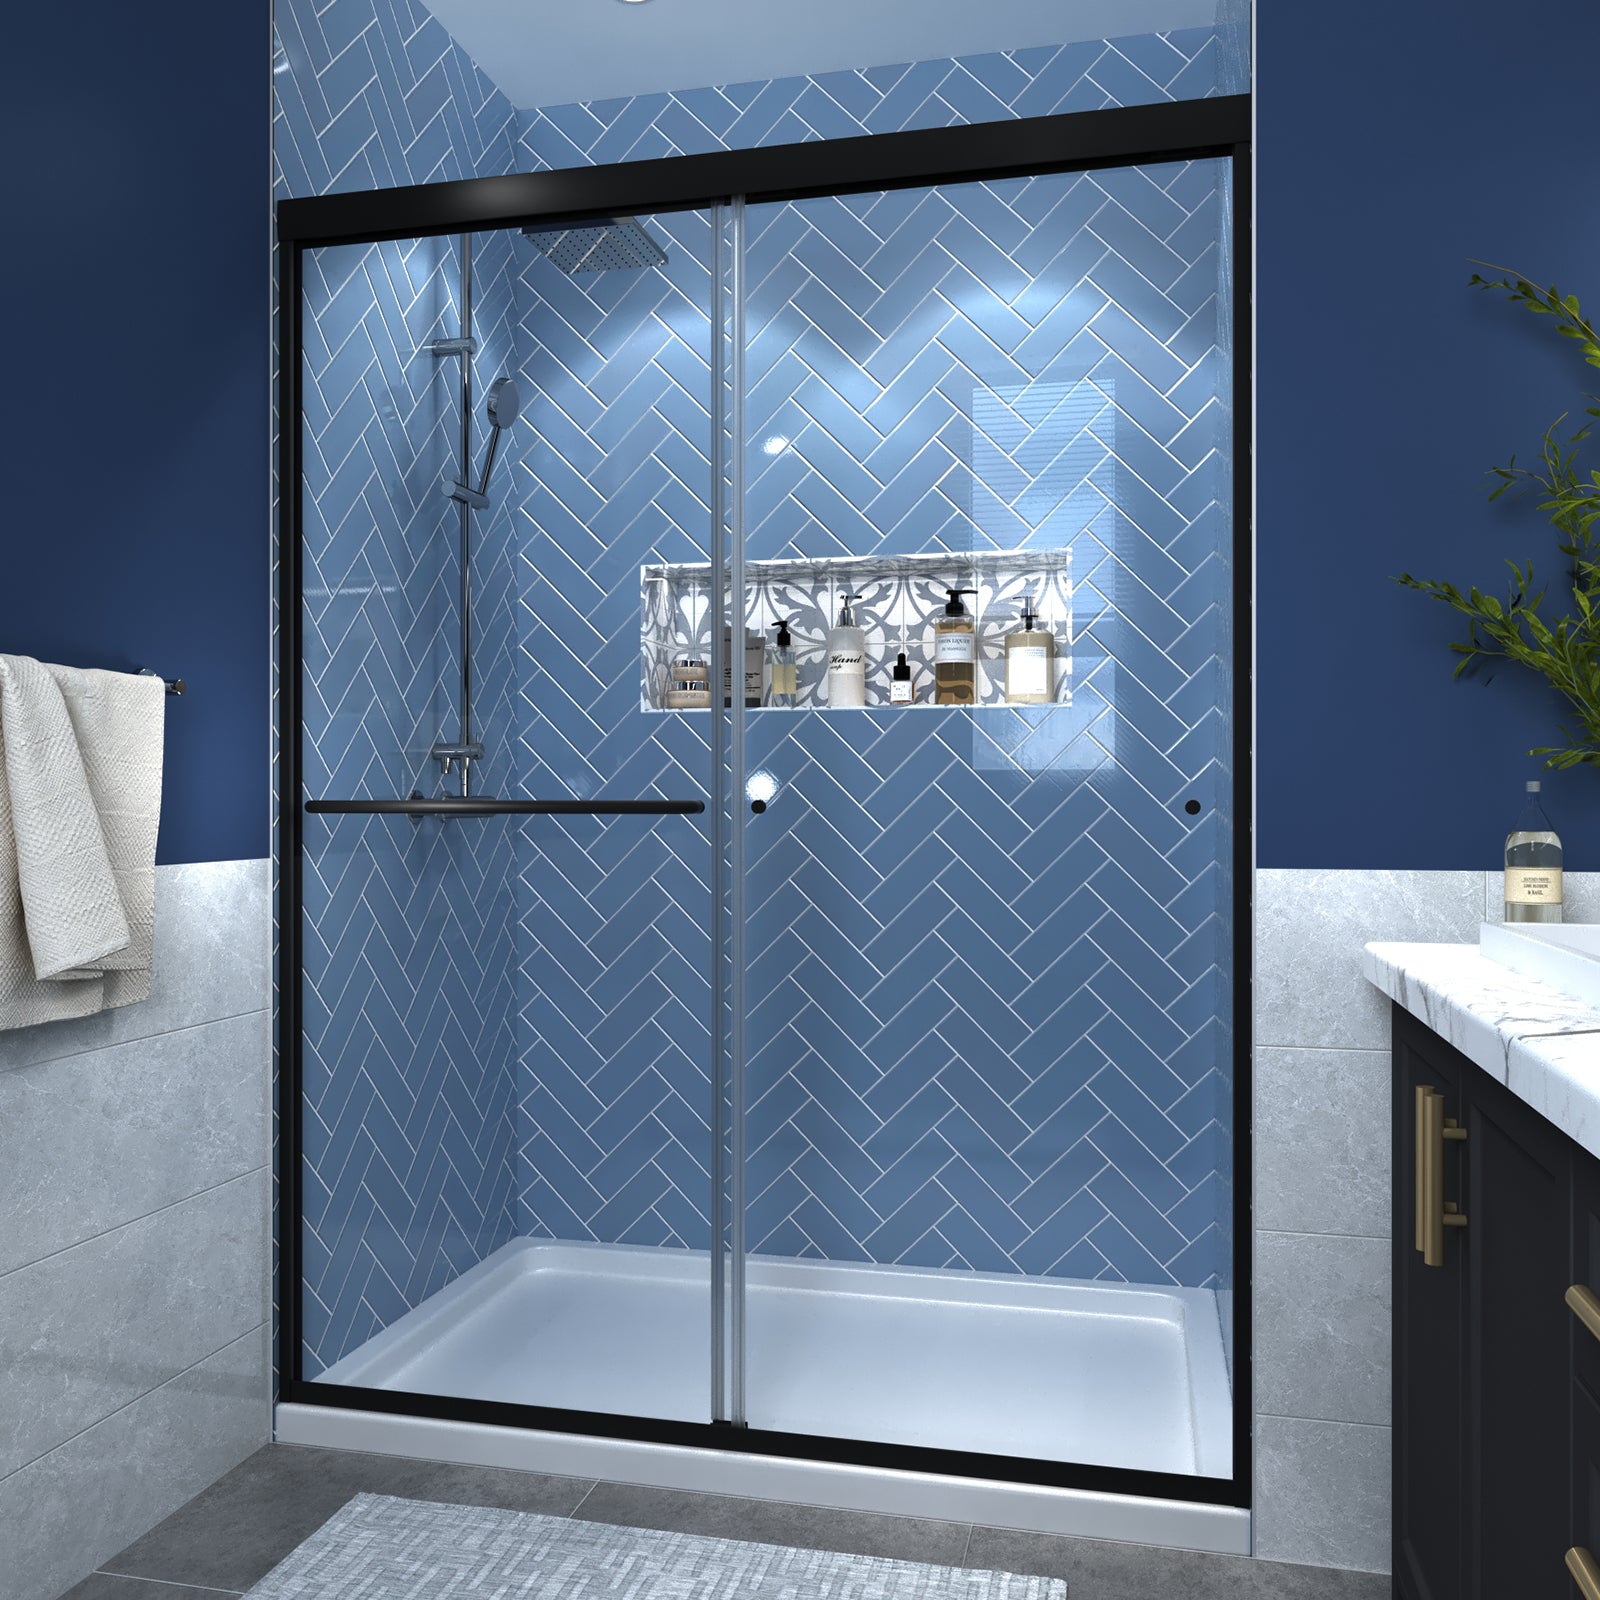 Glide 50-54 in. W x 70 in. H Sliding Glass Shower Doors Frame in Black,Clear Tempered Glass